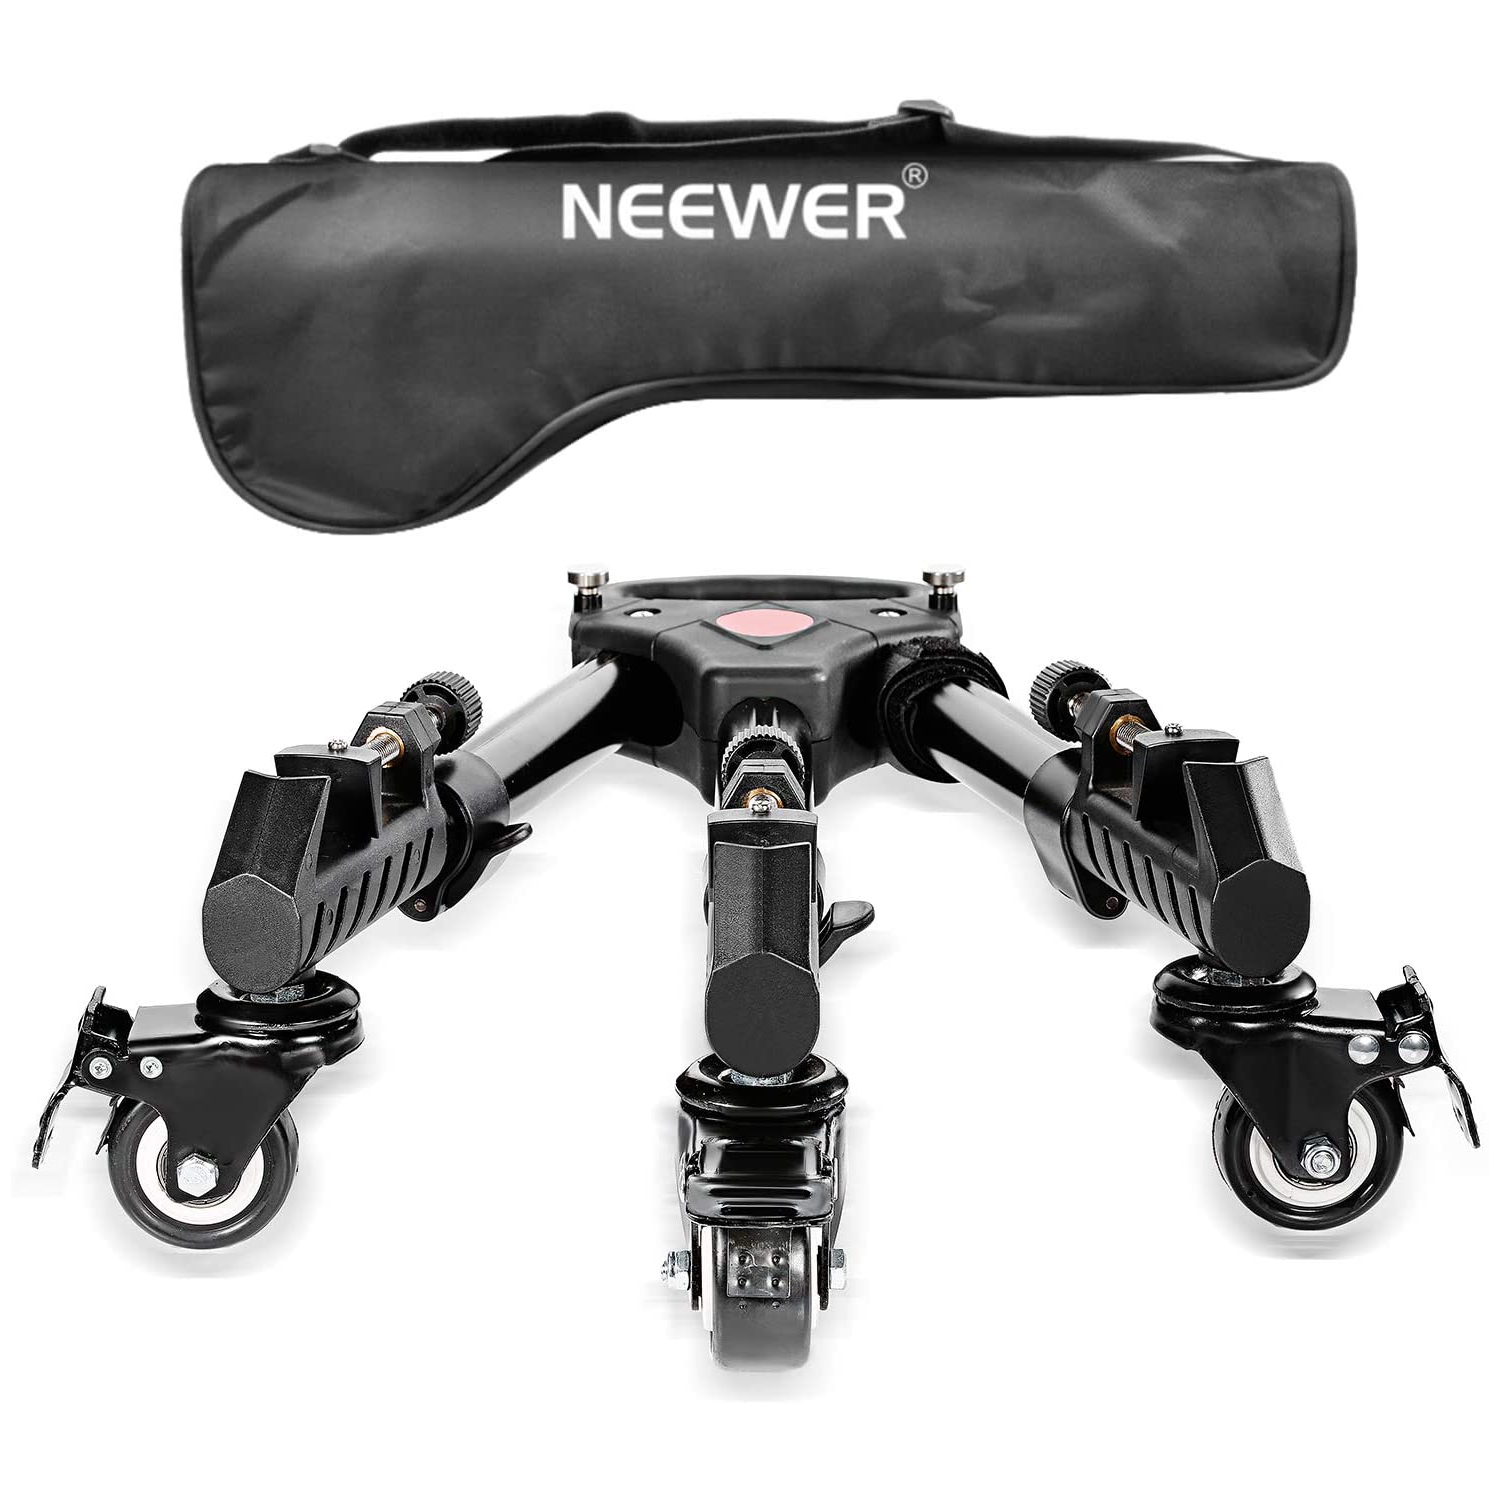 Neewer Professional Heavy Duty Tripod Dolly with Rubber Wheels and Adjustable Leg Mounts compatible for Canon Nikon Sony Cameras Camcorder Photo Video Lighting (black)